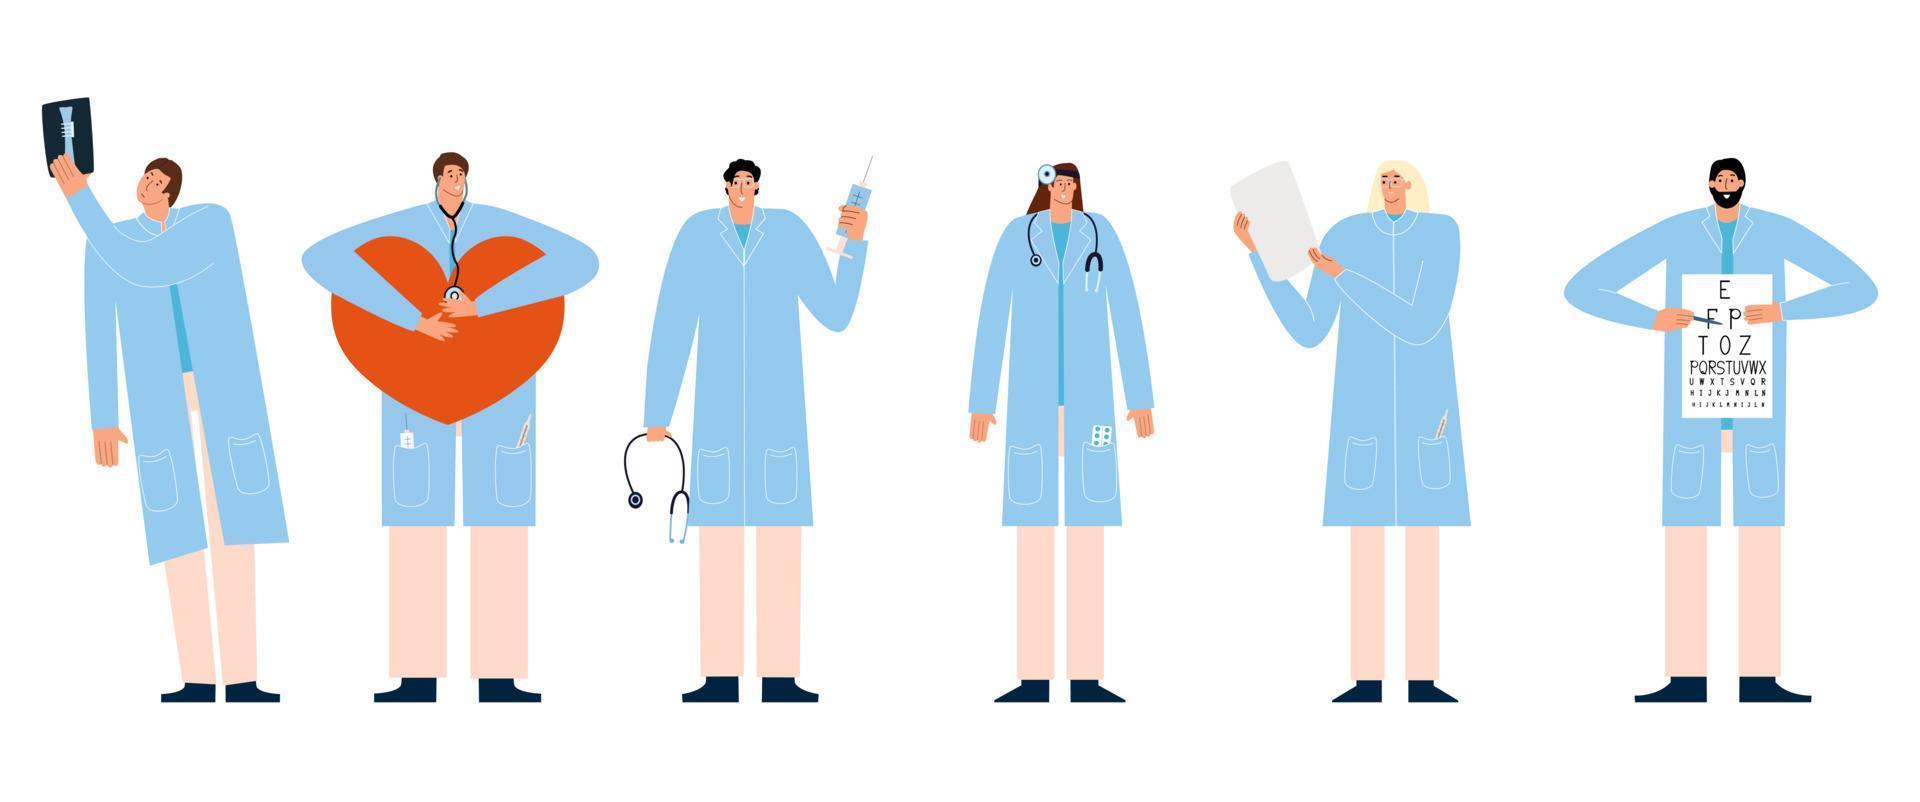 A set of doctors of different specialties. Oculist, cardiologist, surgeon, therapist, psychologist, otolaryngologist, x-ray specialist. Vector illustration in flat style